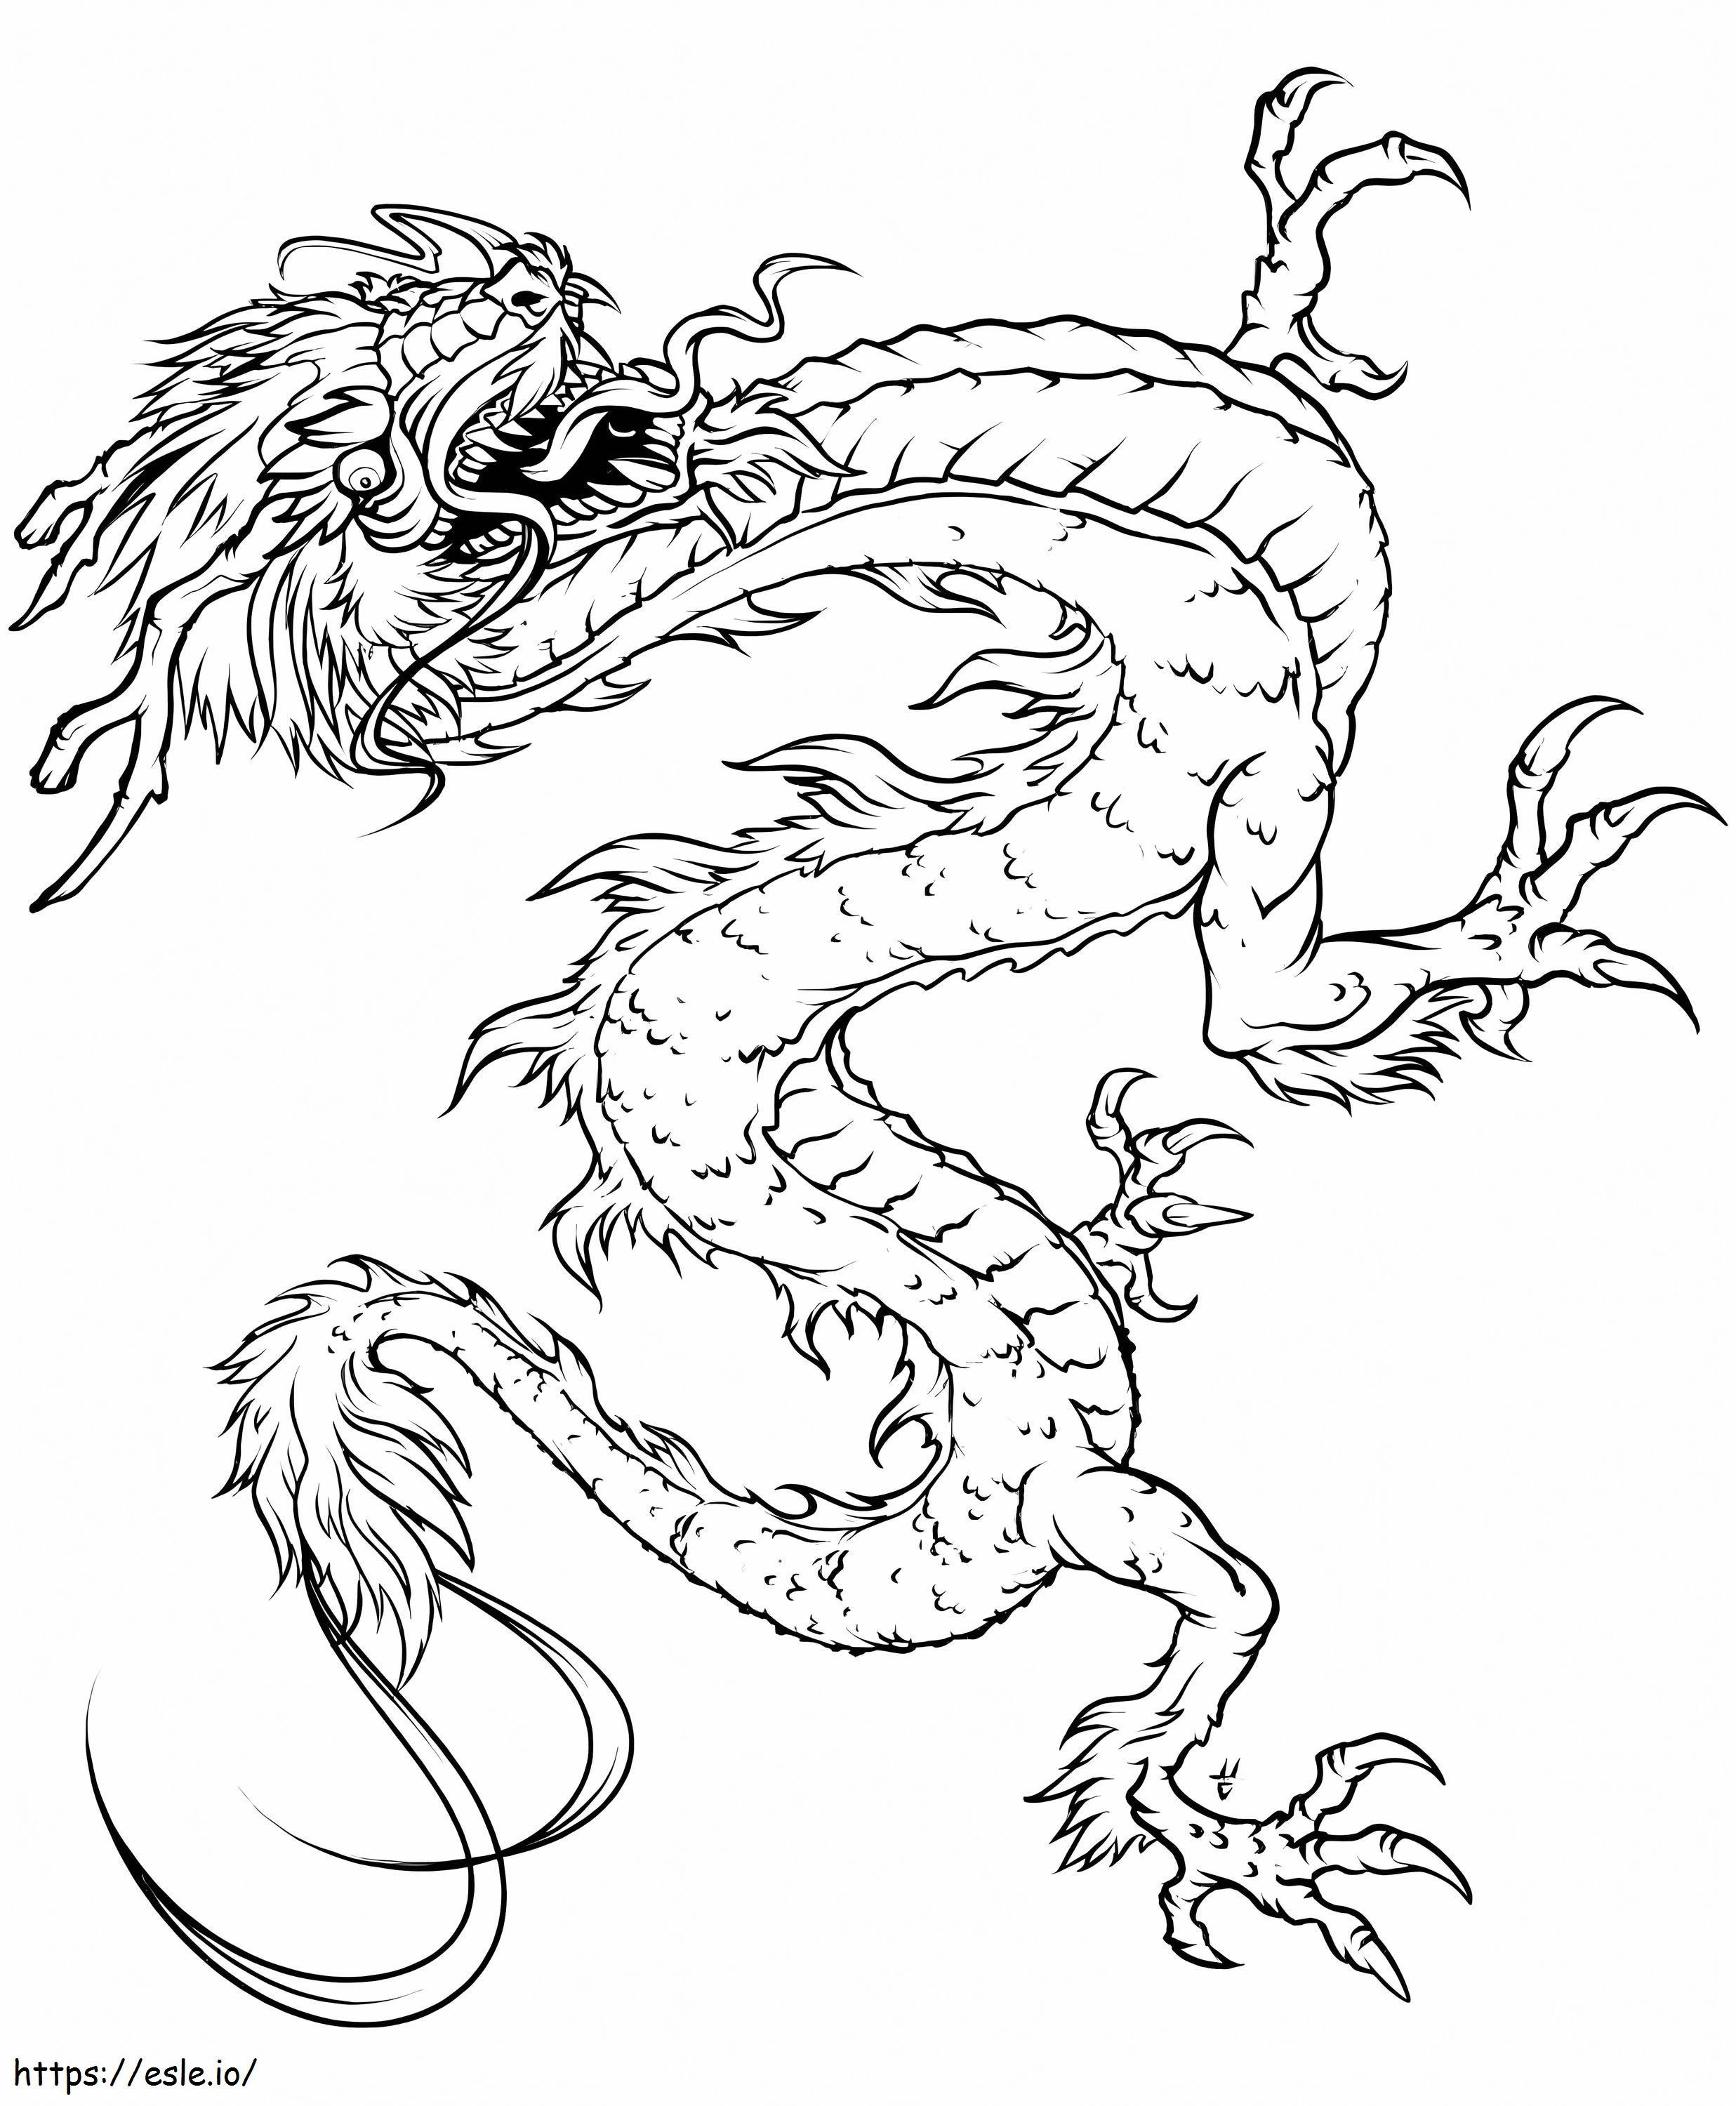 1562557410 Chinese Dragon A4 coloring page